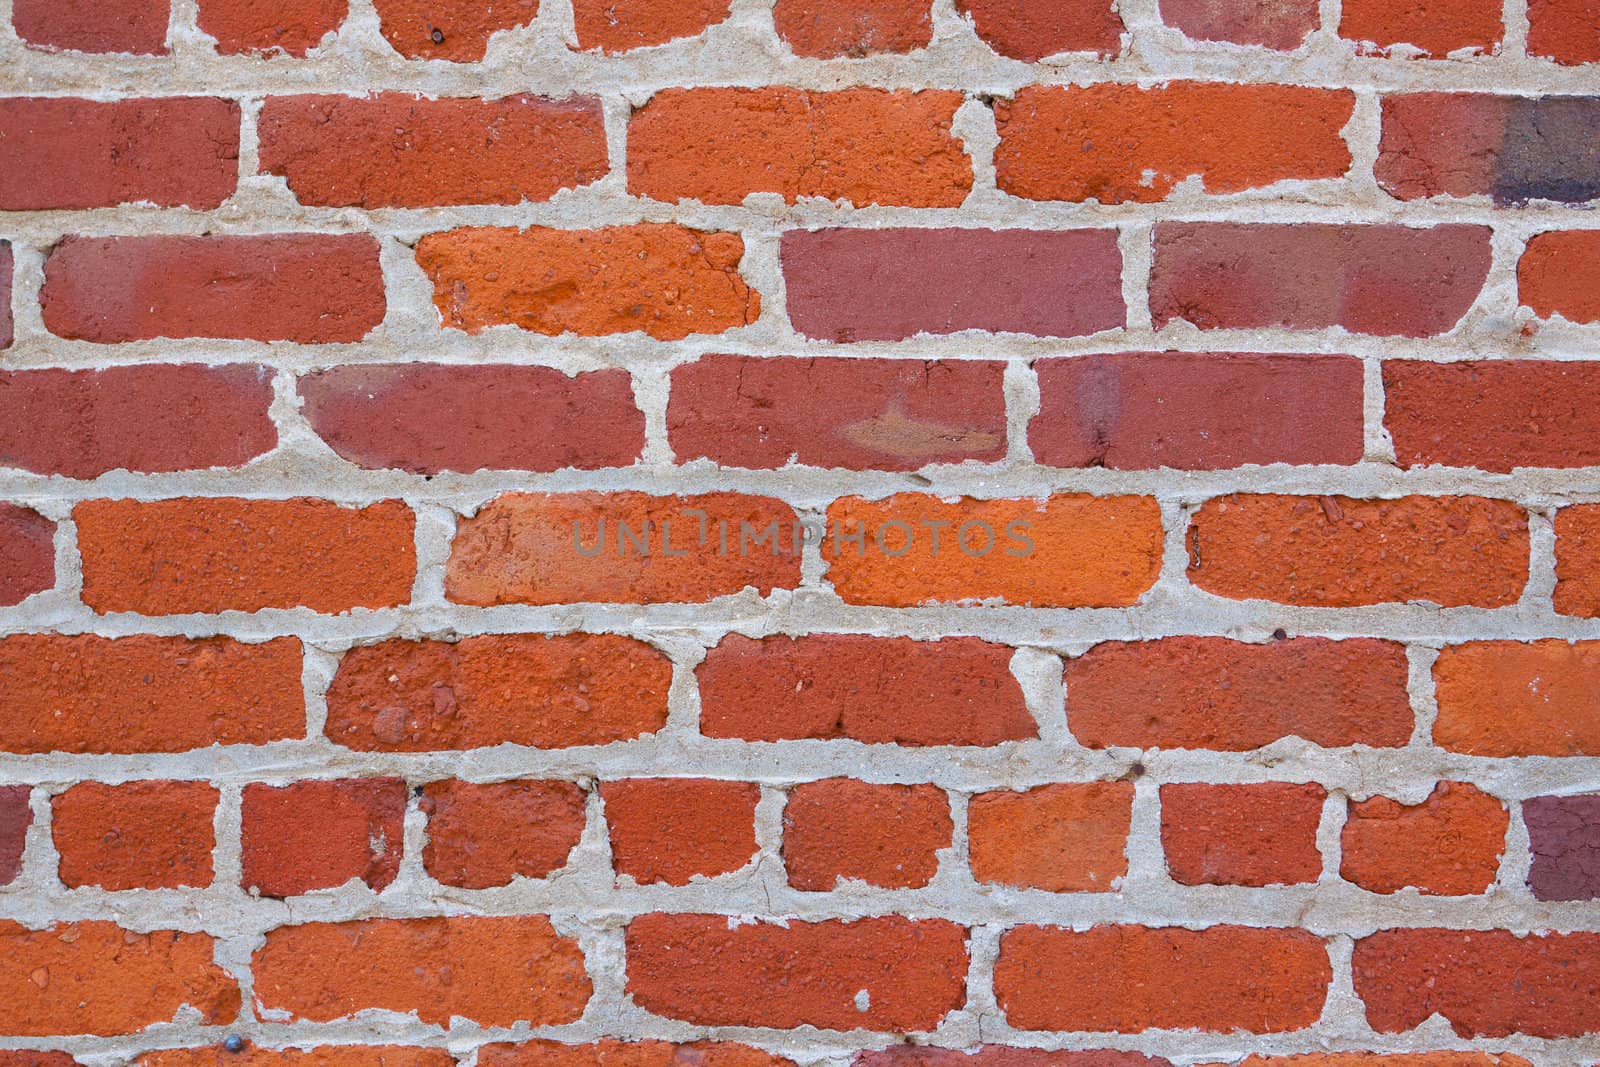 Abstract image of a red brick wall with mortar. Background texture photograph.